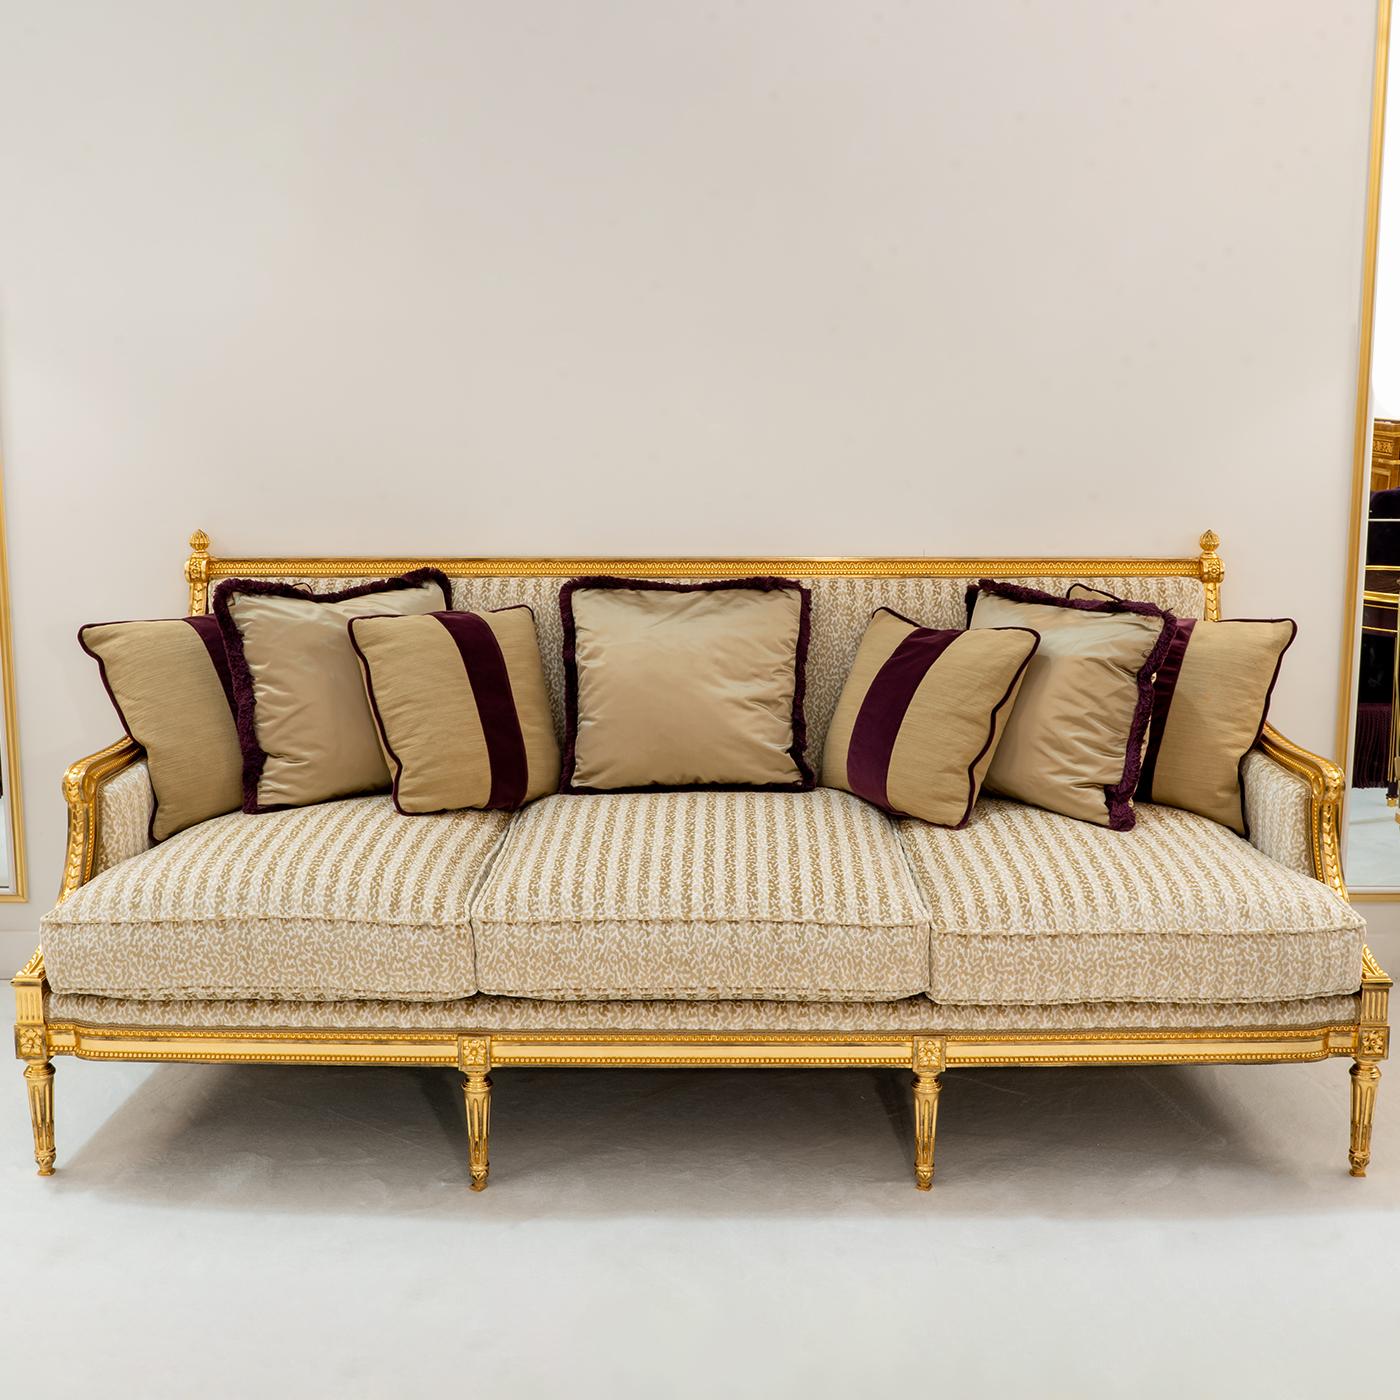 This luxurious sofa recalls seating in Royal European courts. Covered in gold leaf, the frame sports minute detailing obtained as a result of a meticulous hand-carving process that implies the uniqueness of every single piece. A sophisticated